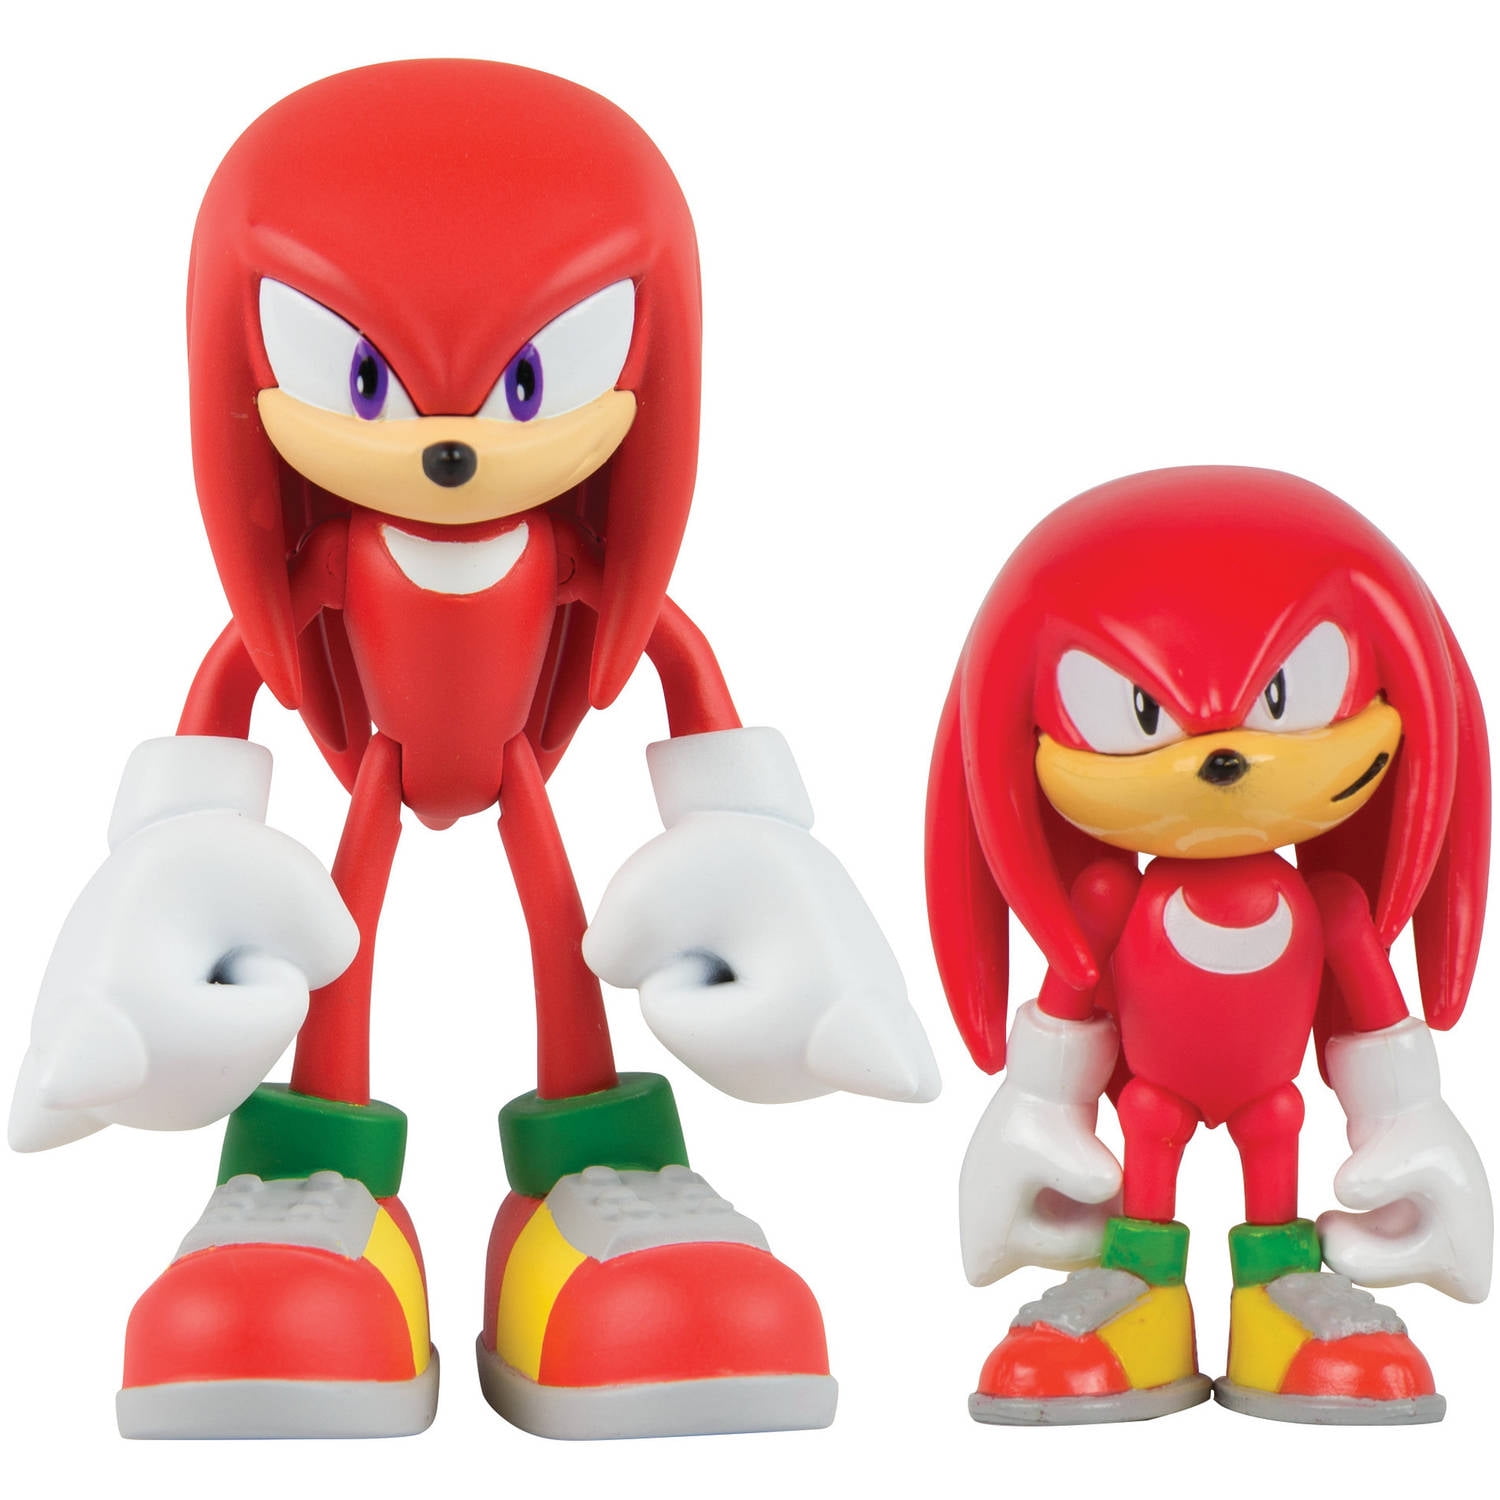 Sonic the Hedgehog 3 Vinyl Figure Sonic and Knuckles 2-Pack